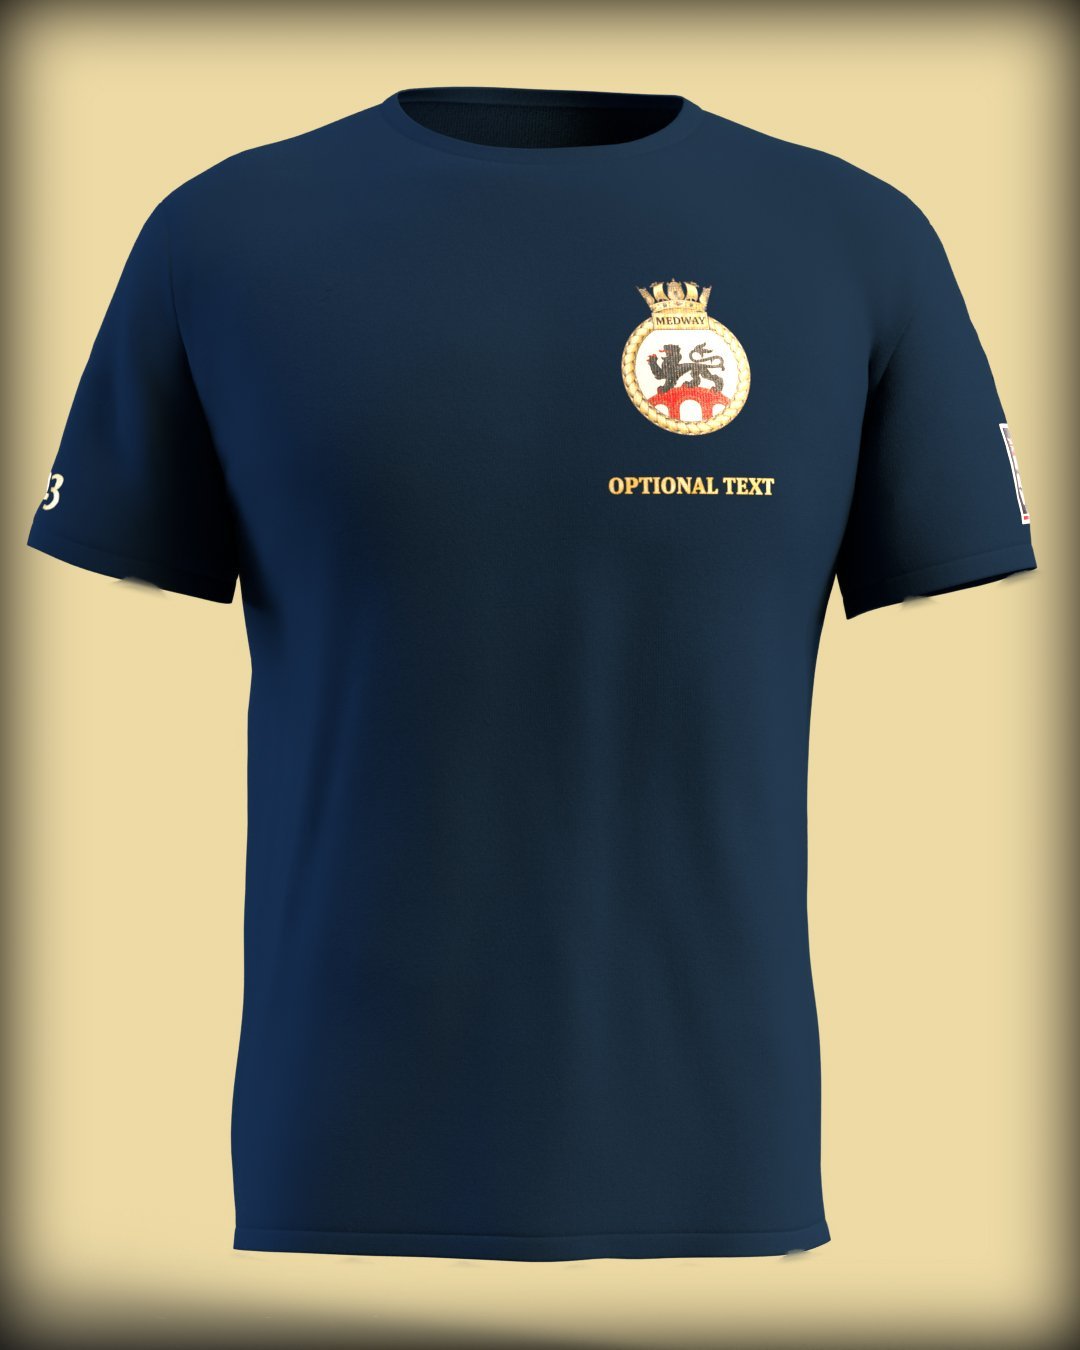 HMS Medway Crest on Navy Blue Tee (Customisable) - Cleekers